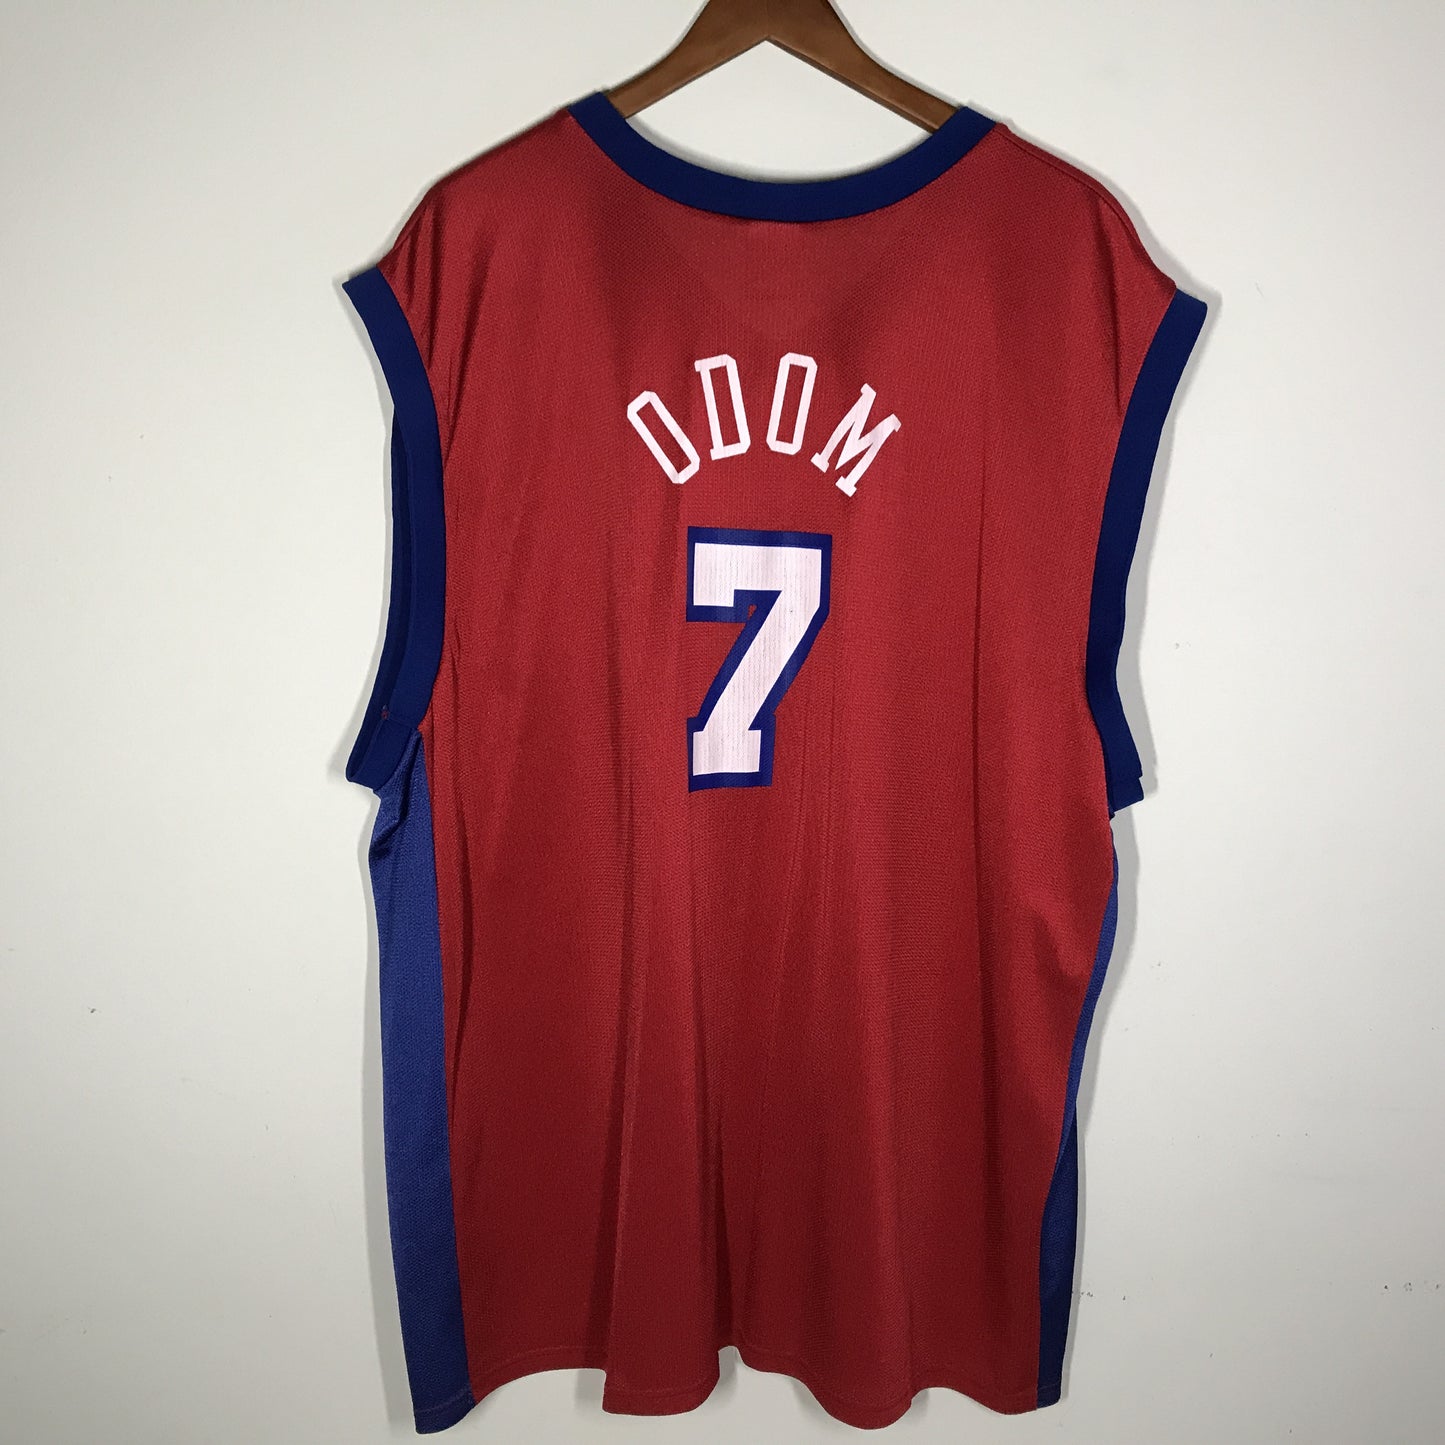 Lamar Odom Champion Jersey Los Angeles Clippers Size 52 XXL